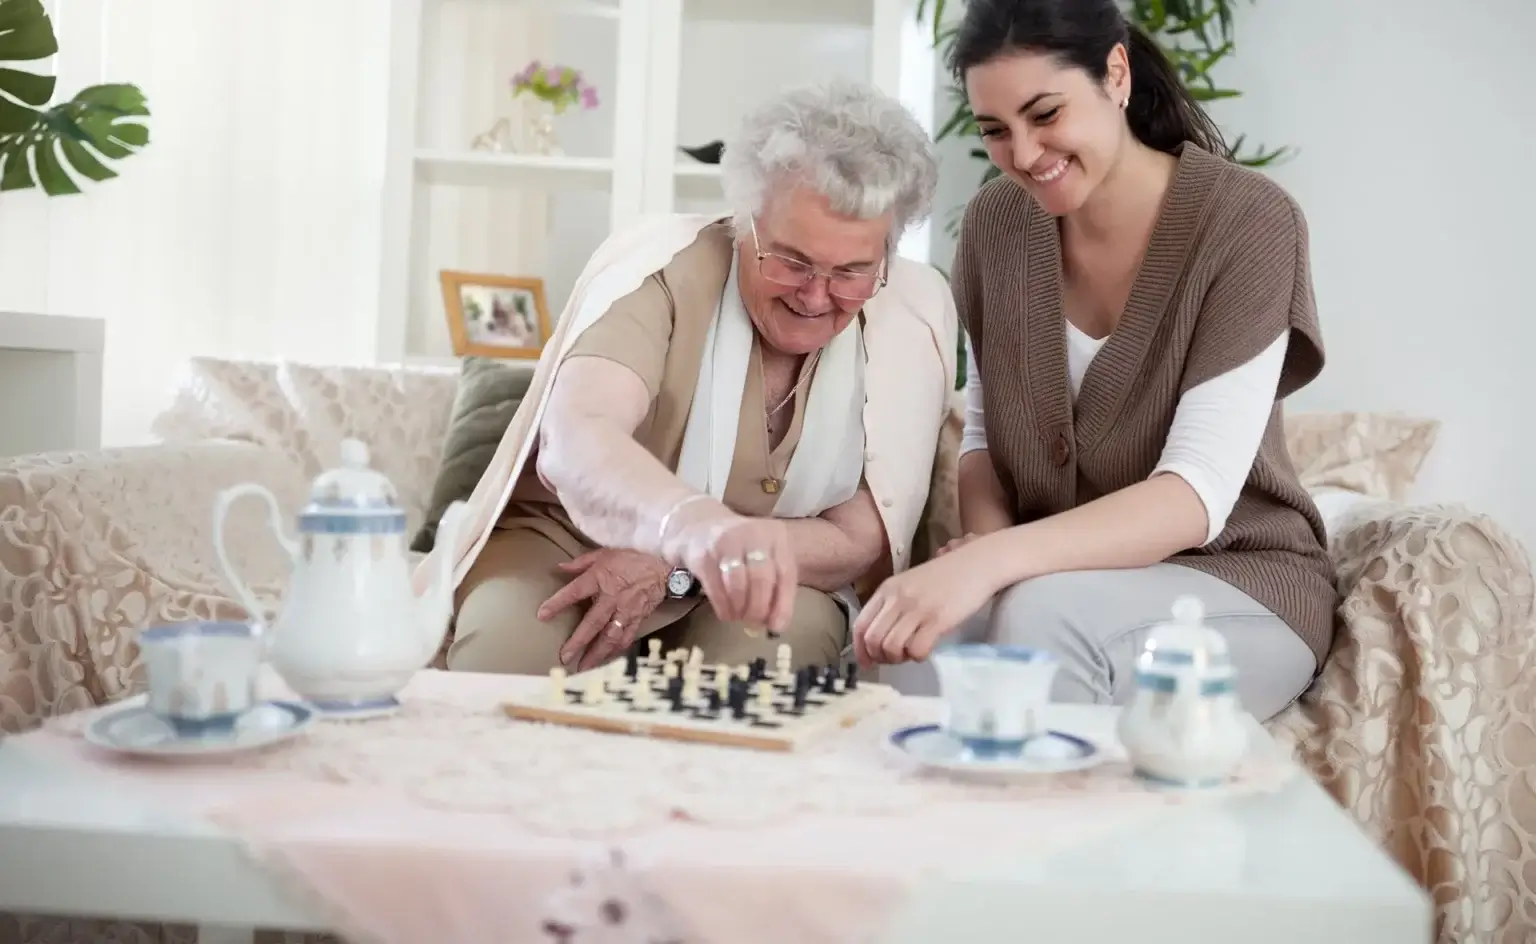 Elder care services for your loved one